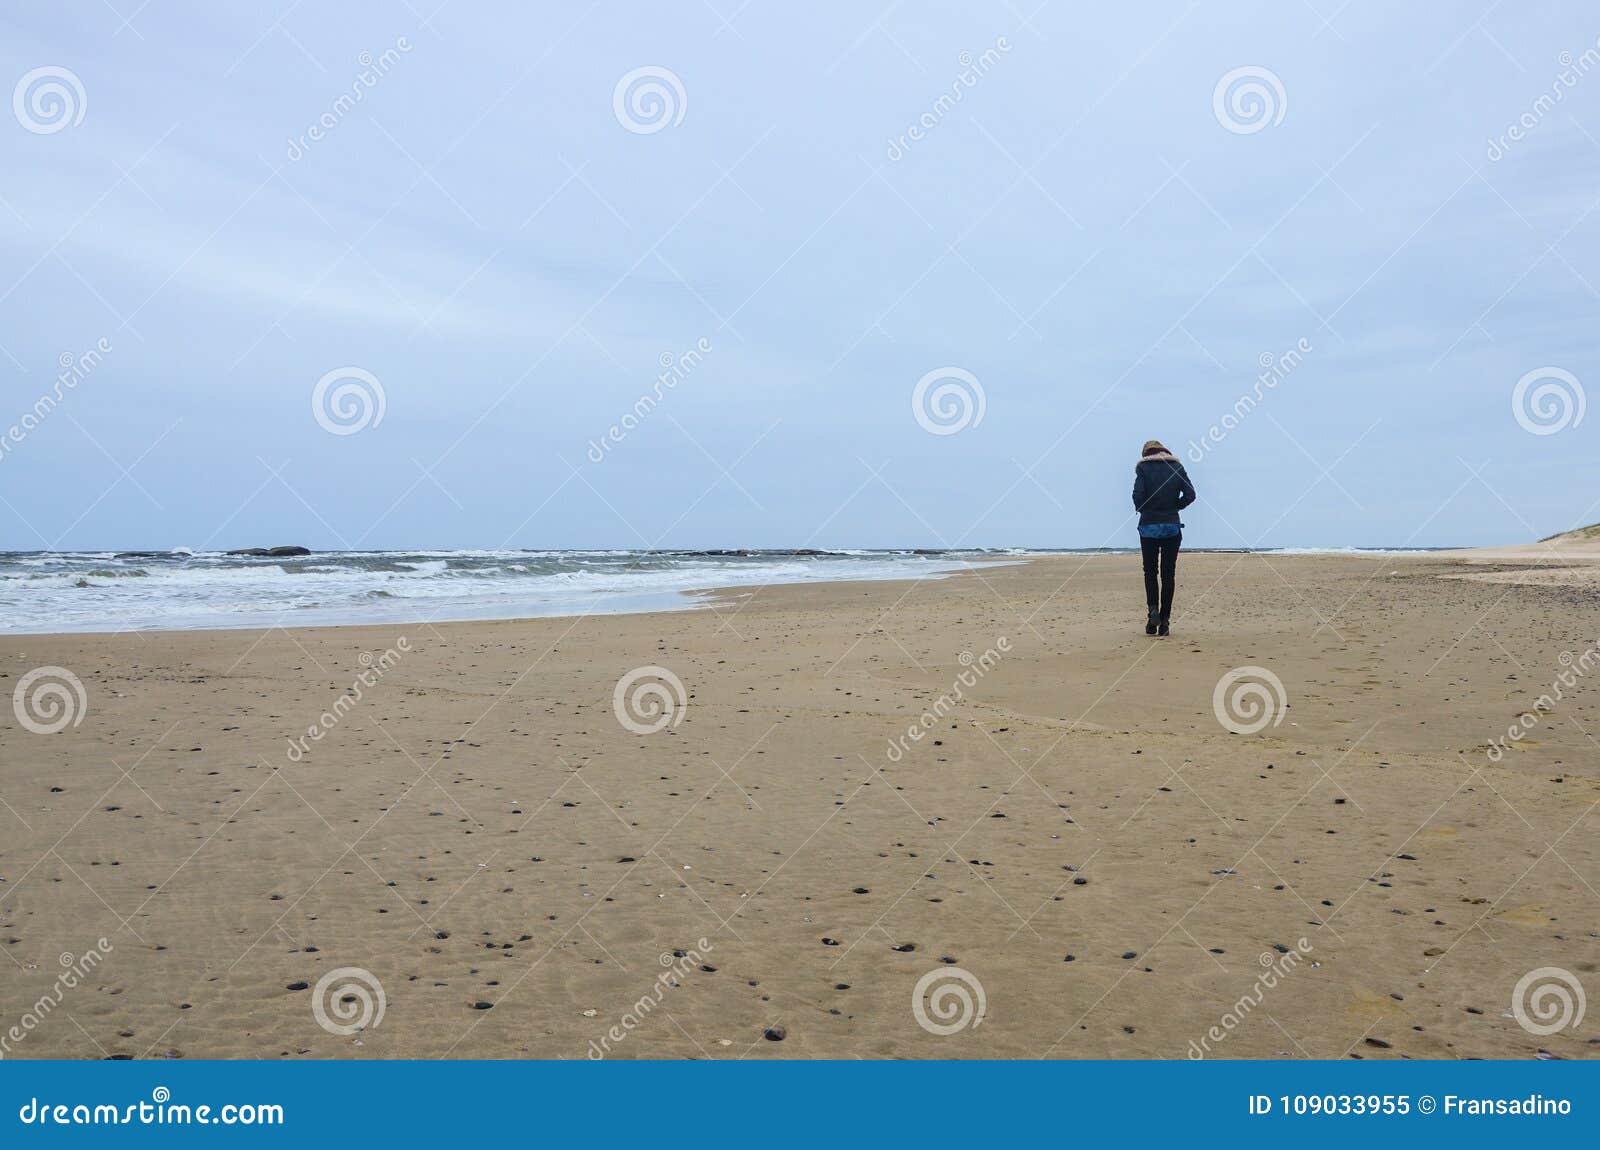 girl walking alone at the beach.